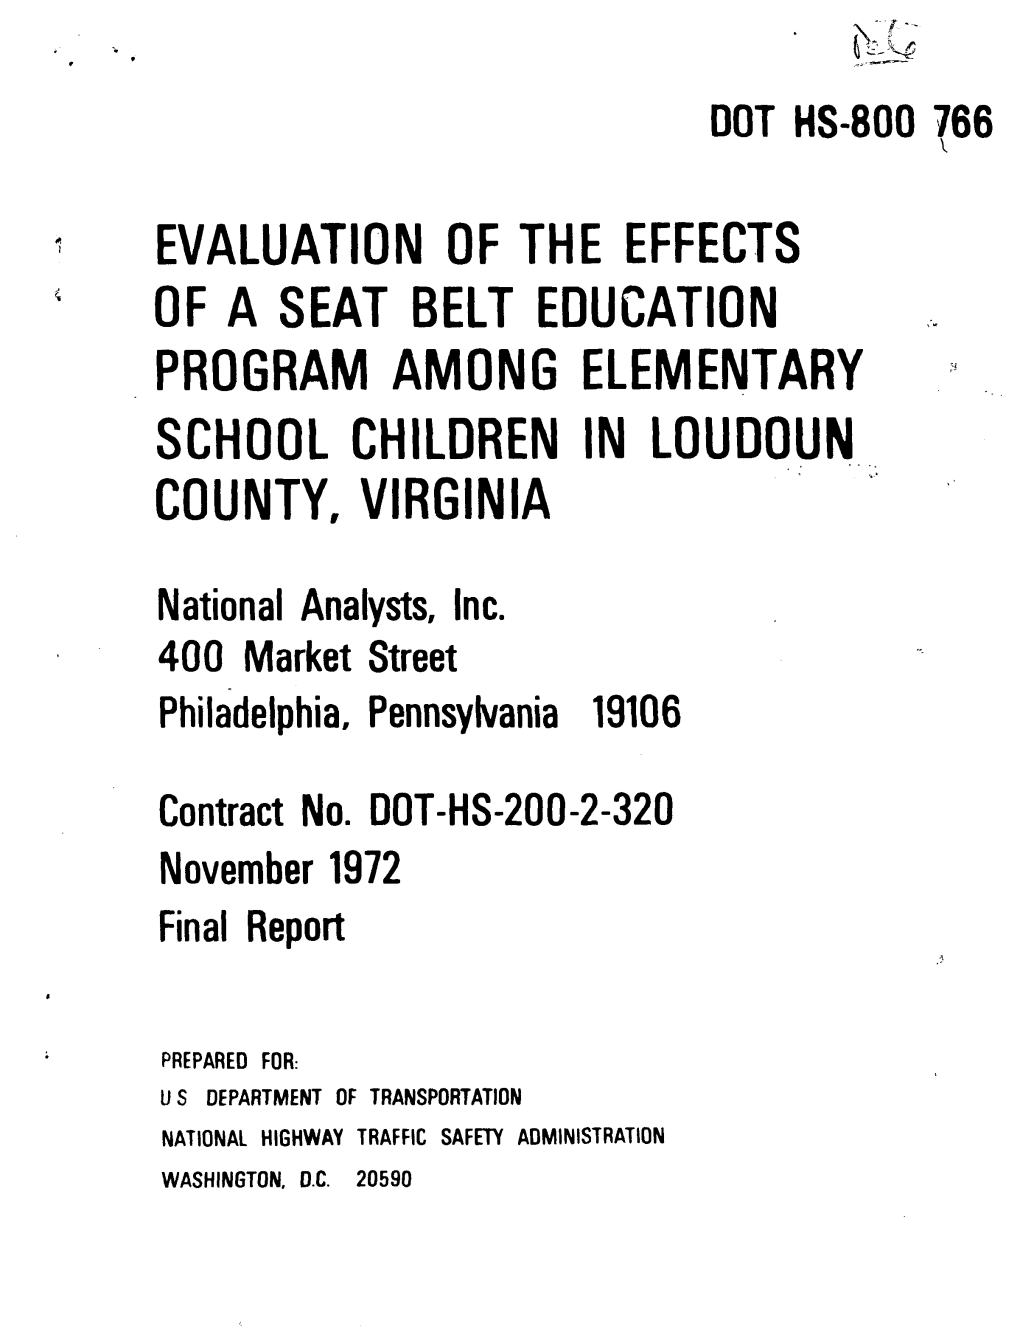 Evaluation of the Effects of a Seat Belt Education Program Among Elementary School Children in Loudoun County, Virginia